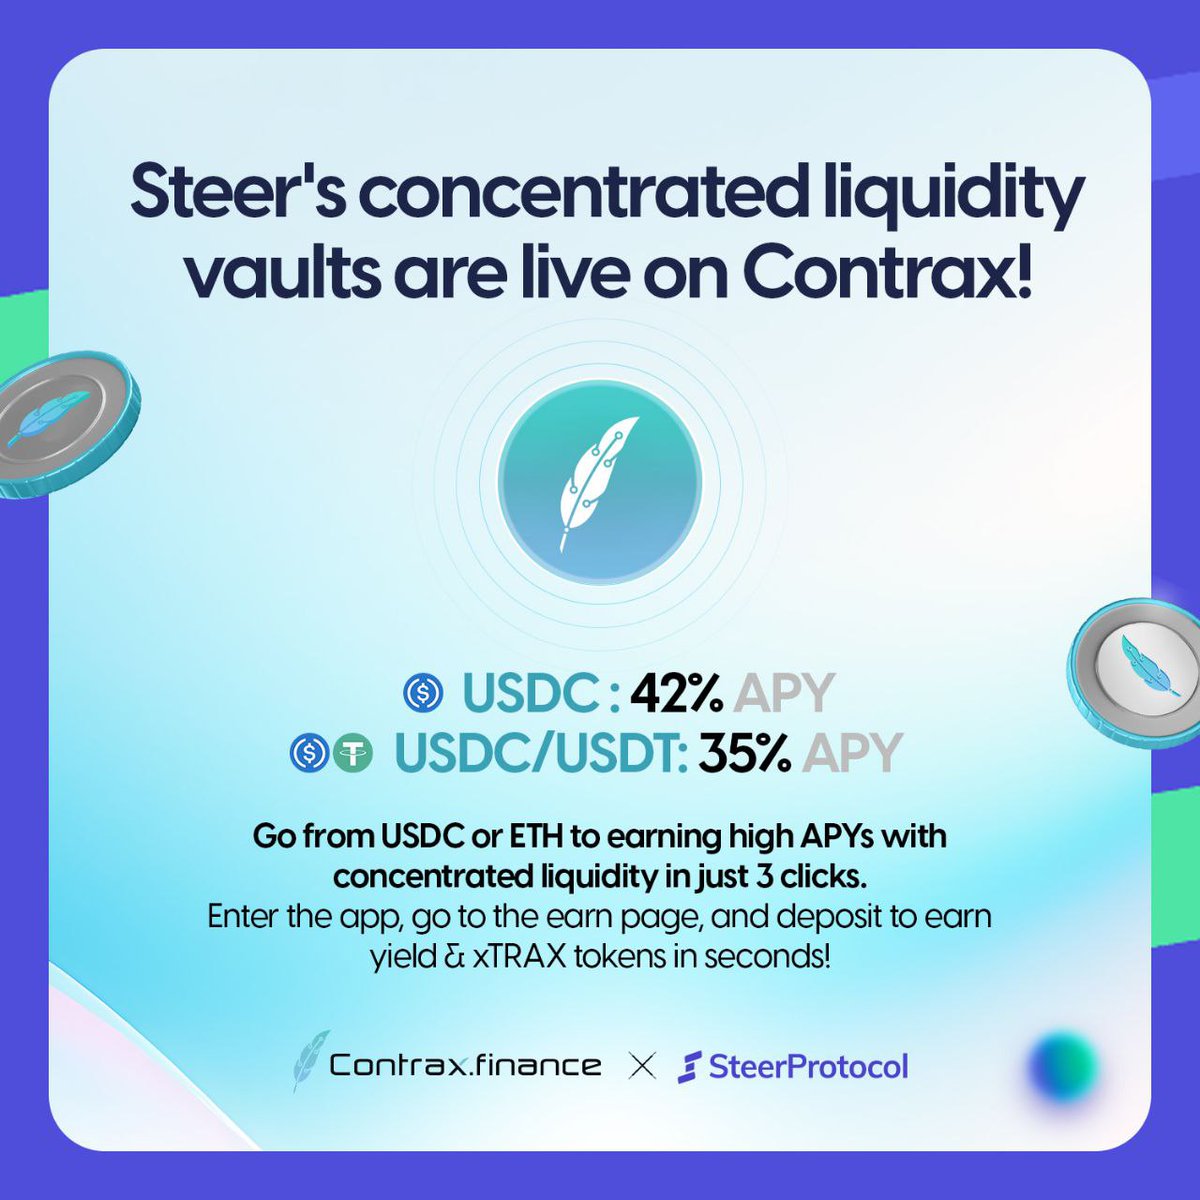 🌟 They're here again! Steer Concentrated Liquidity Vaults return to Contrax with unbeatable APYs: 42% on USDC and 35% on USDC/USDT. 💥 Just 3 clicks away! Enter the app, visit the earn page, and deposit to earn yield & xTRAX tokens in seconds!